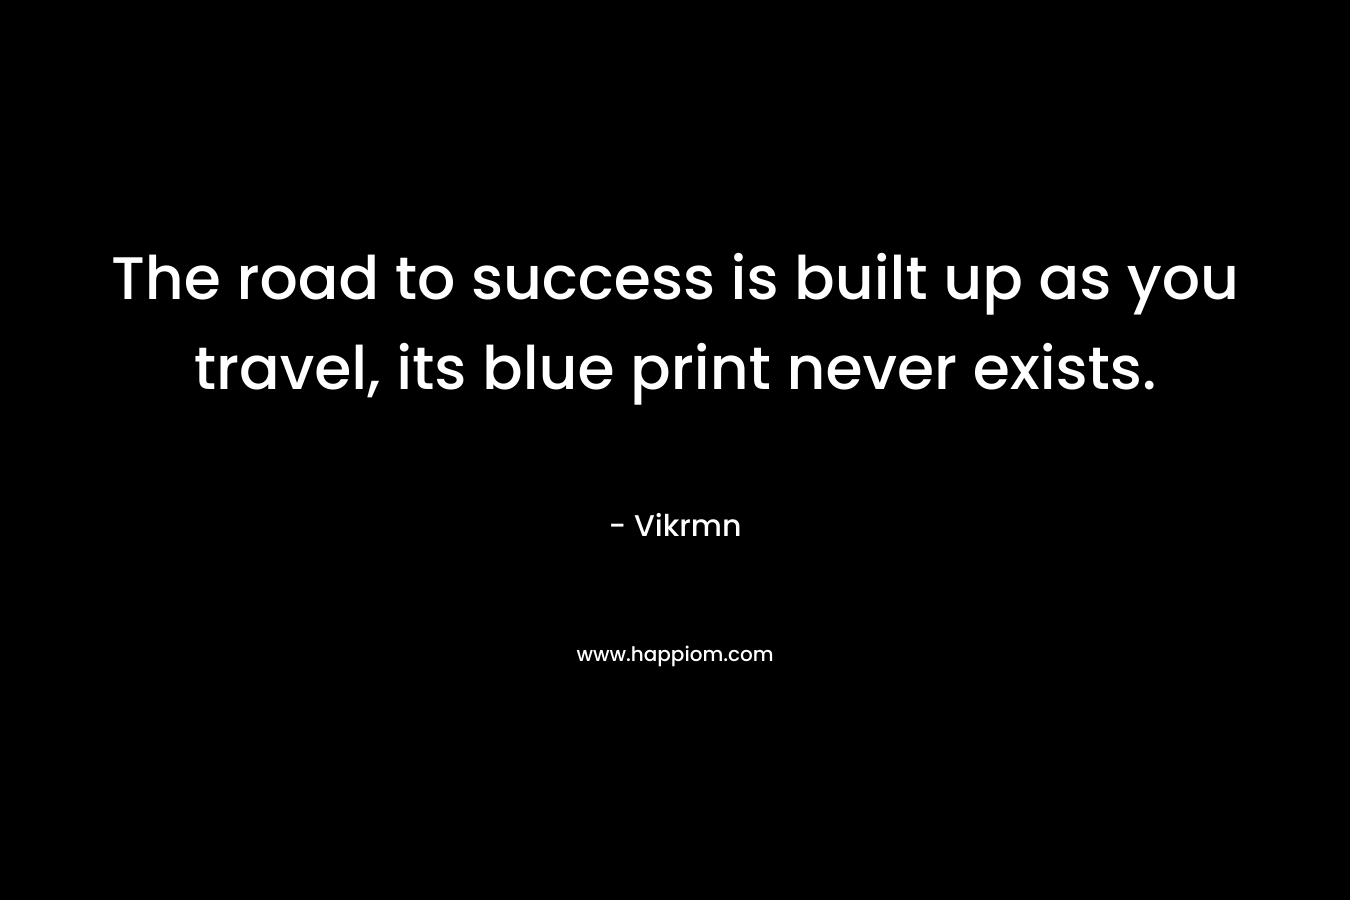 The road to success is built up as you travel, its blue print never exists.